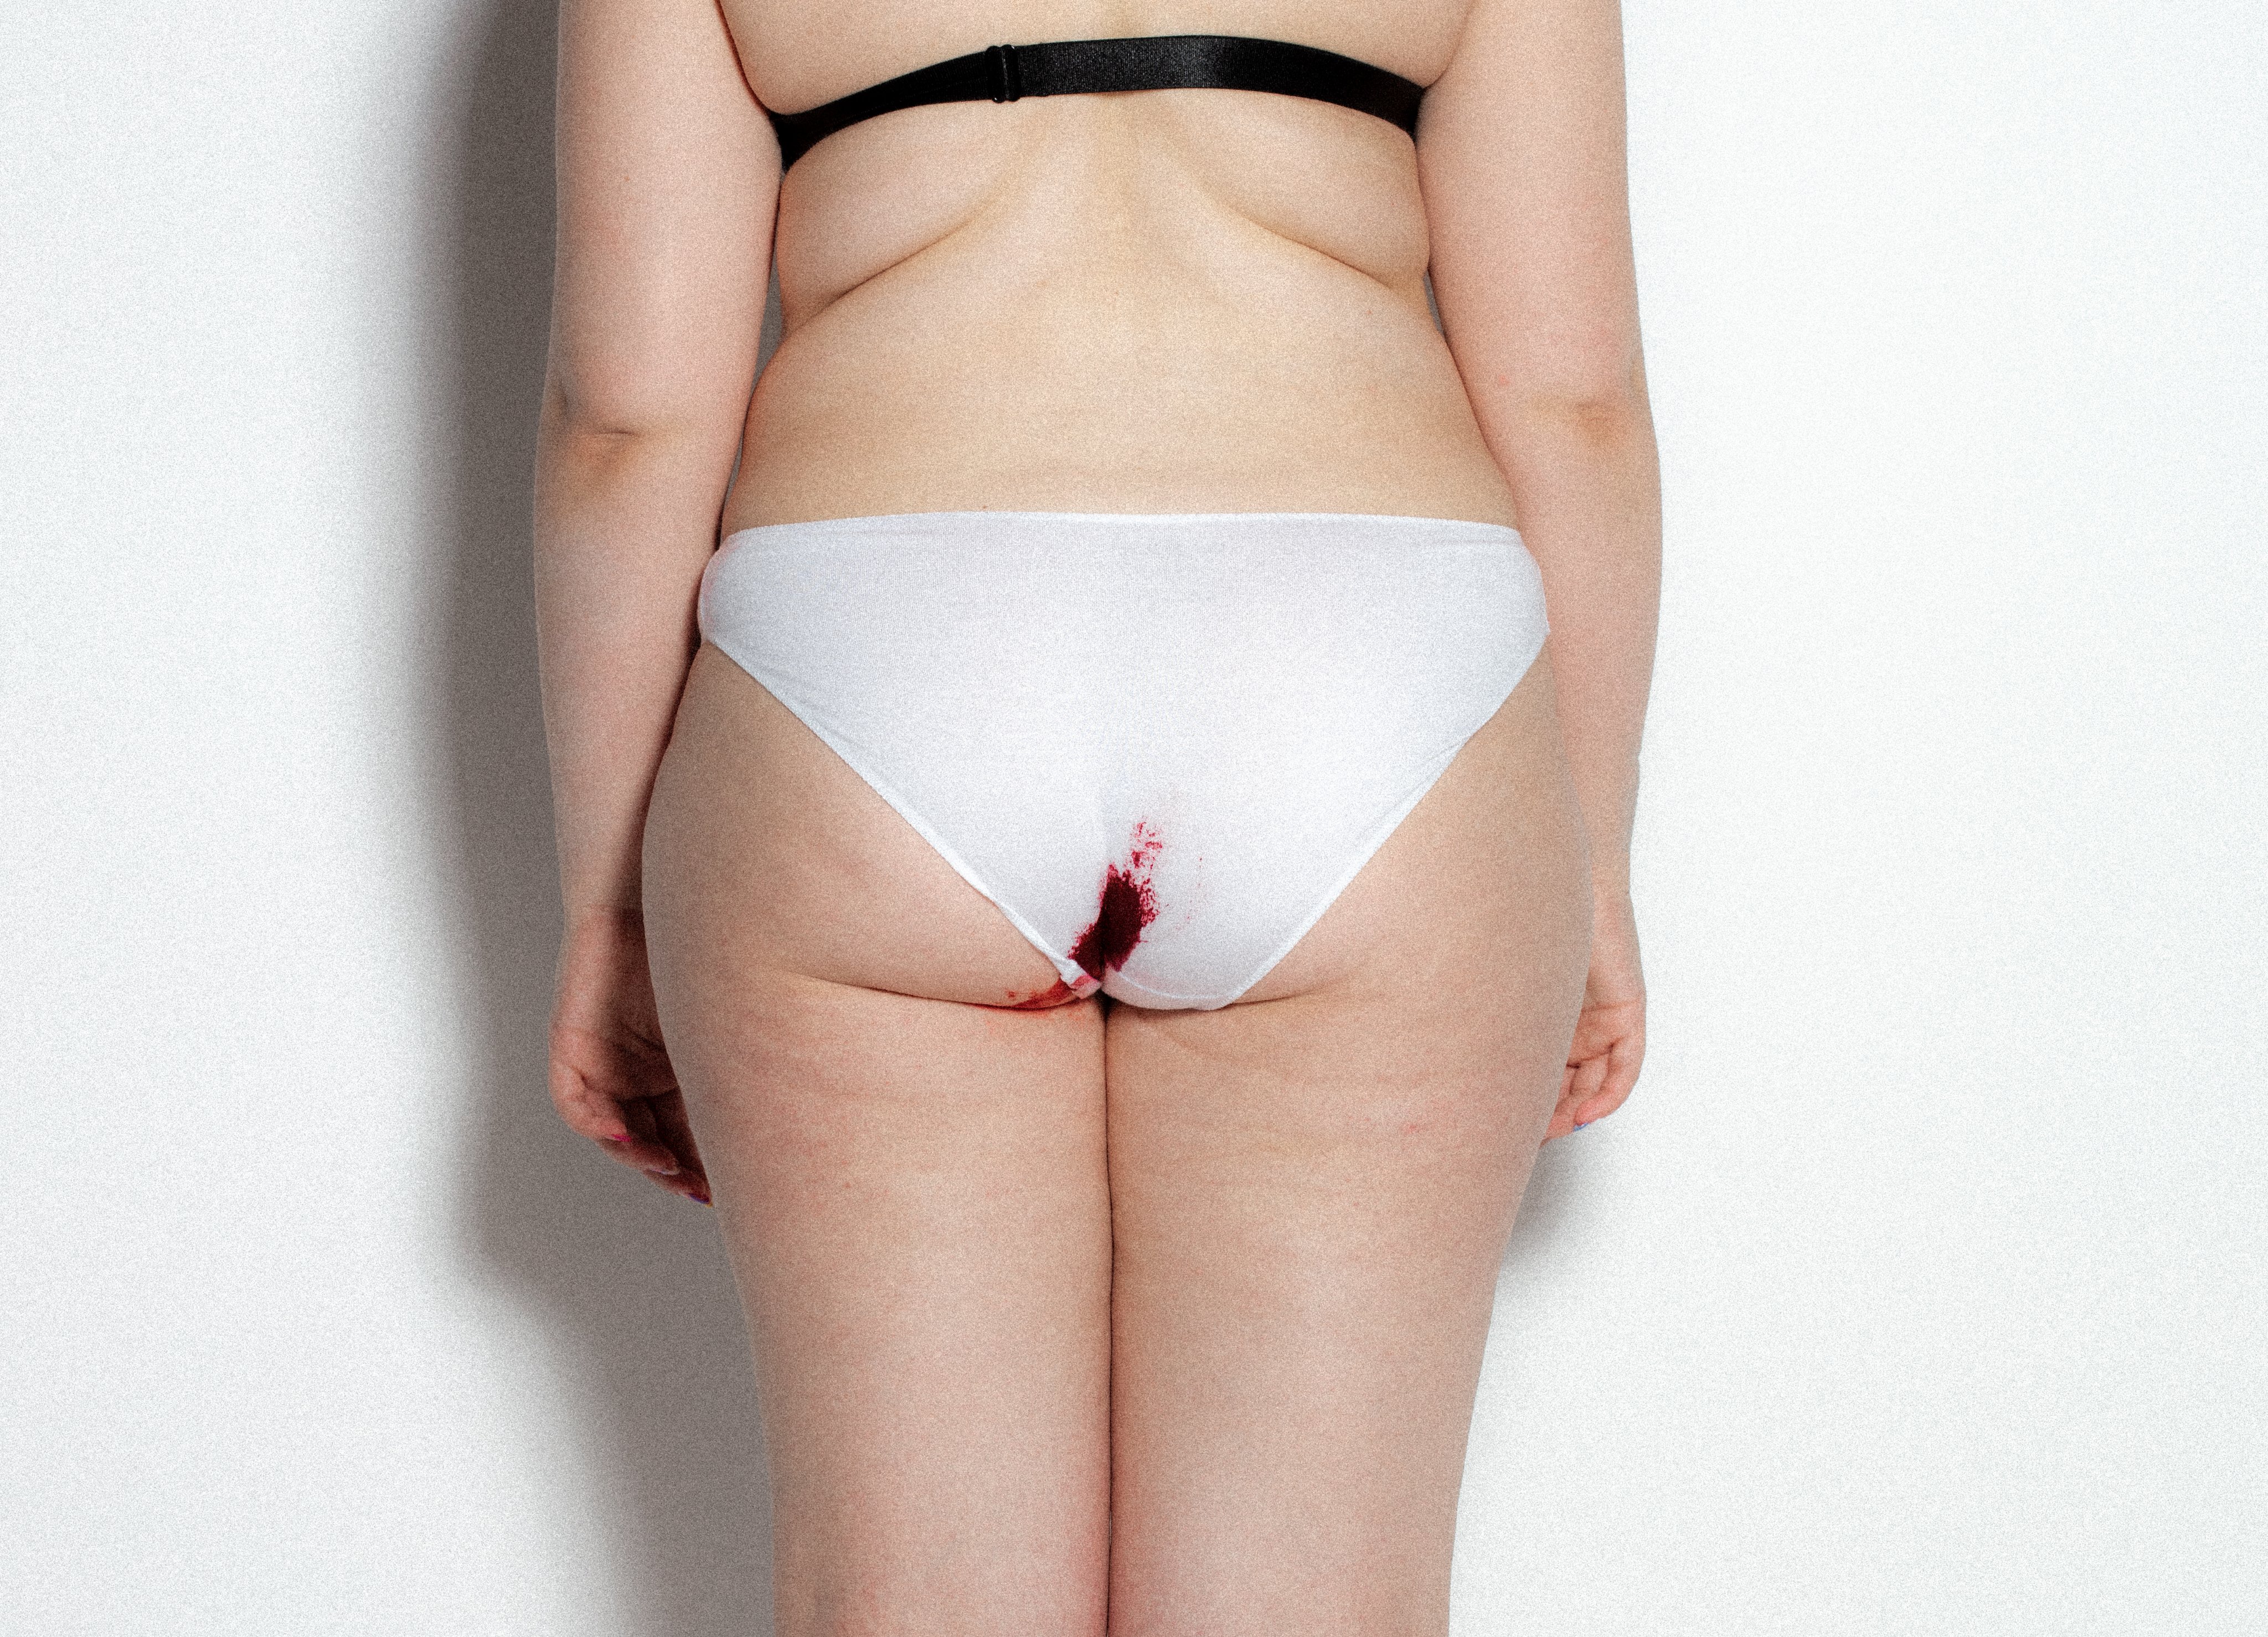 Yiğit Erkol on X: A(b)Normal Life #5 Minted on Foundation!! We added the  blood on the panties. But when the model came, she said she had her period  in the morning. I